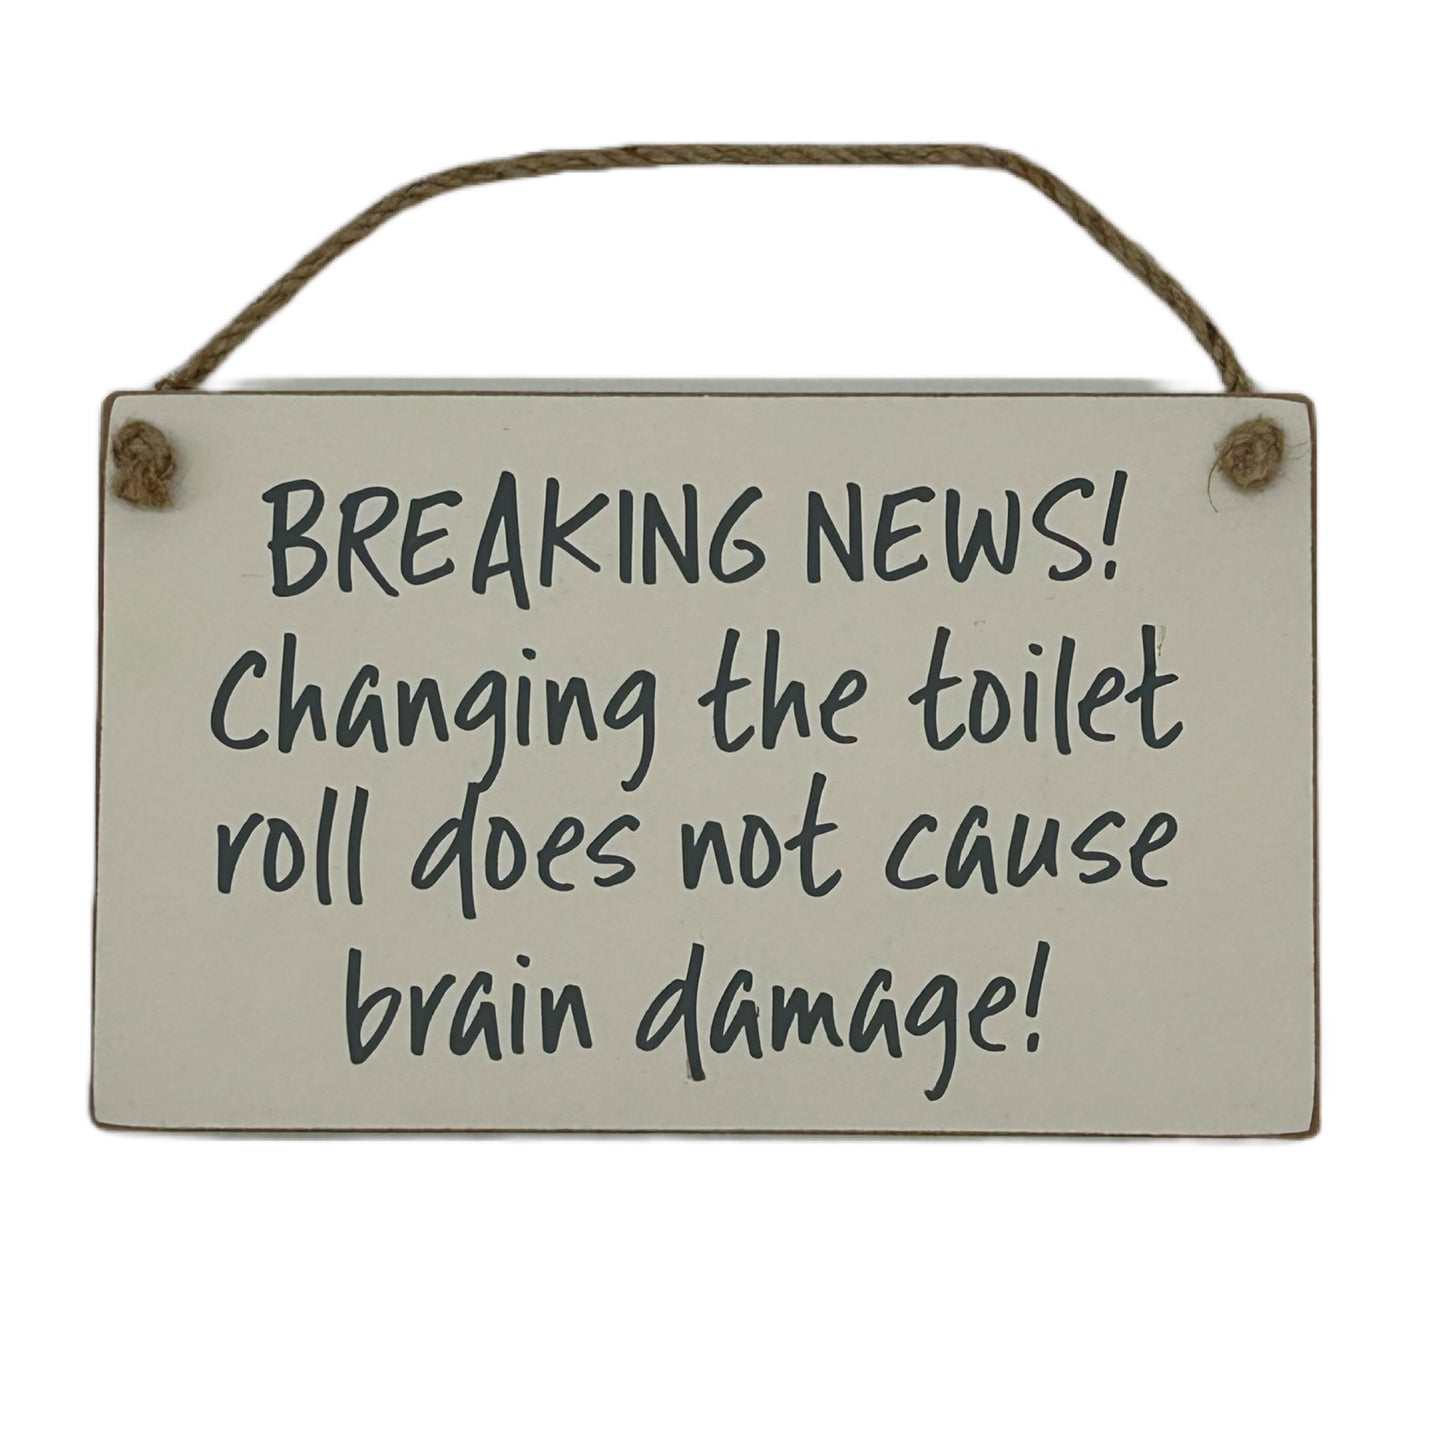 BREAKING NEWS! Changing the toilet roll does NOT cause brain